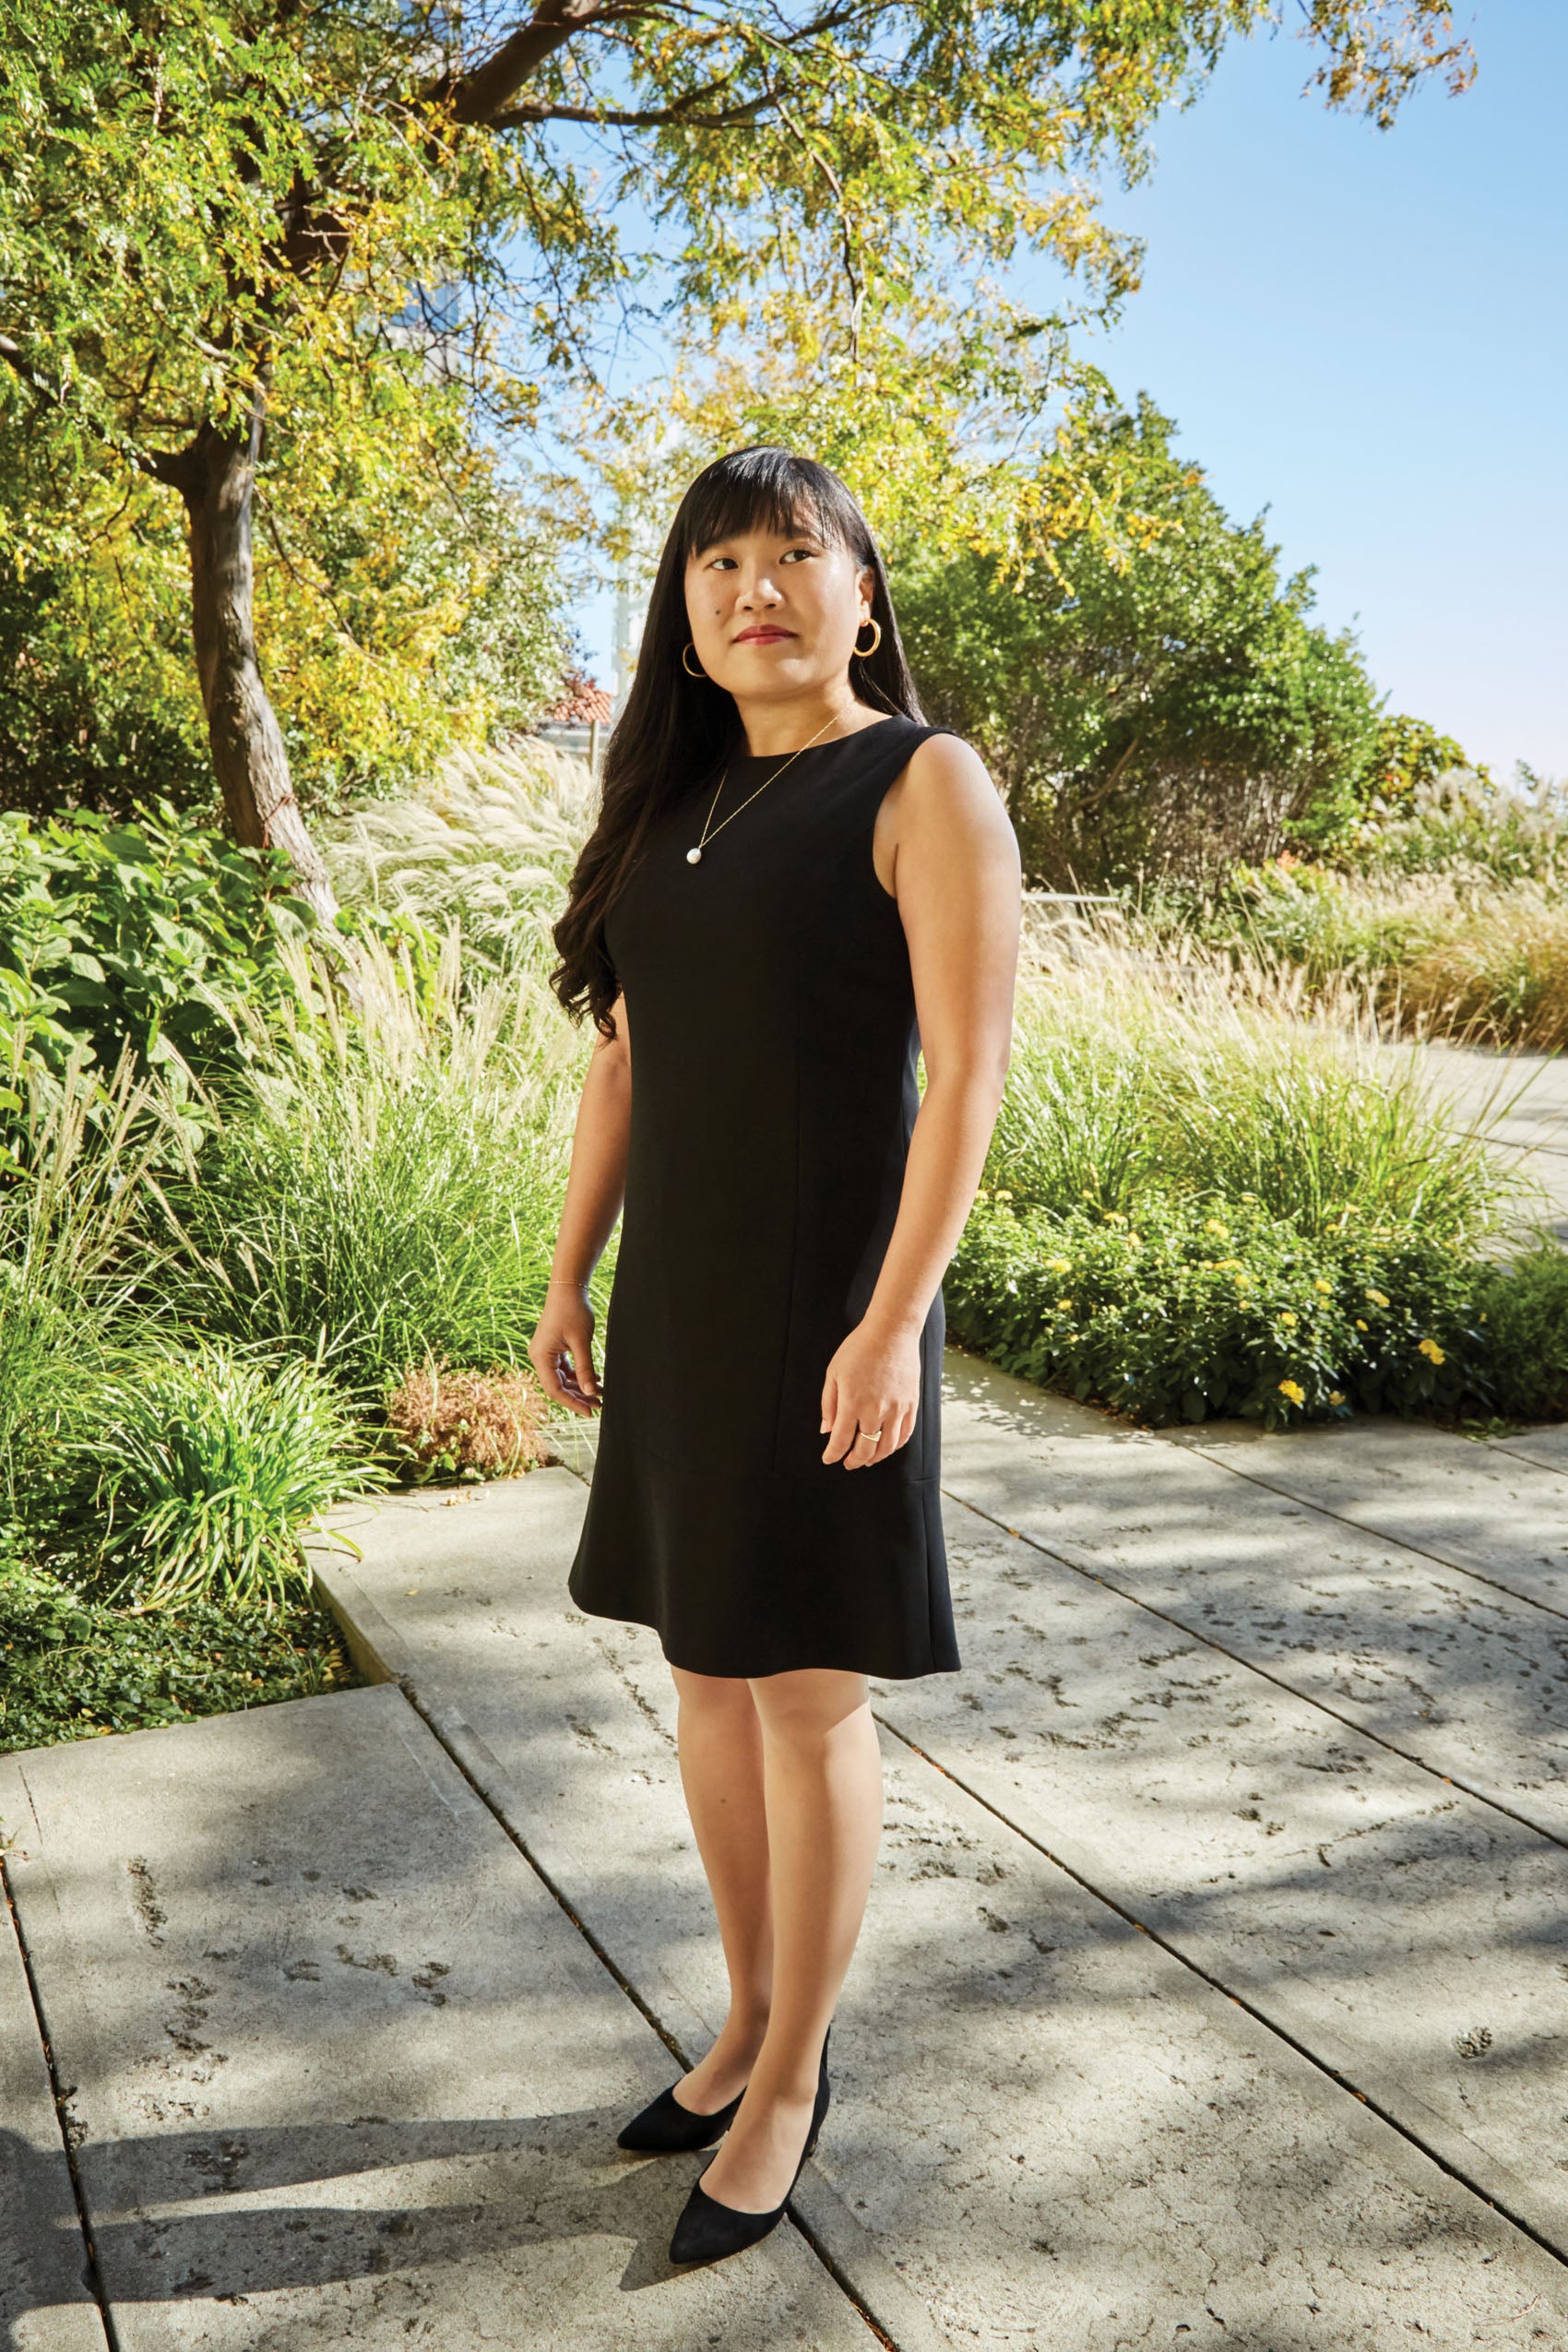 Photograph of Geehyun Sussan Lee '15 posing outside